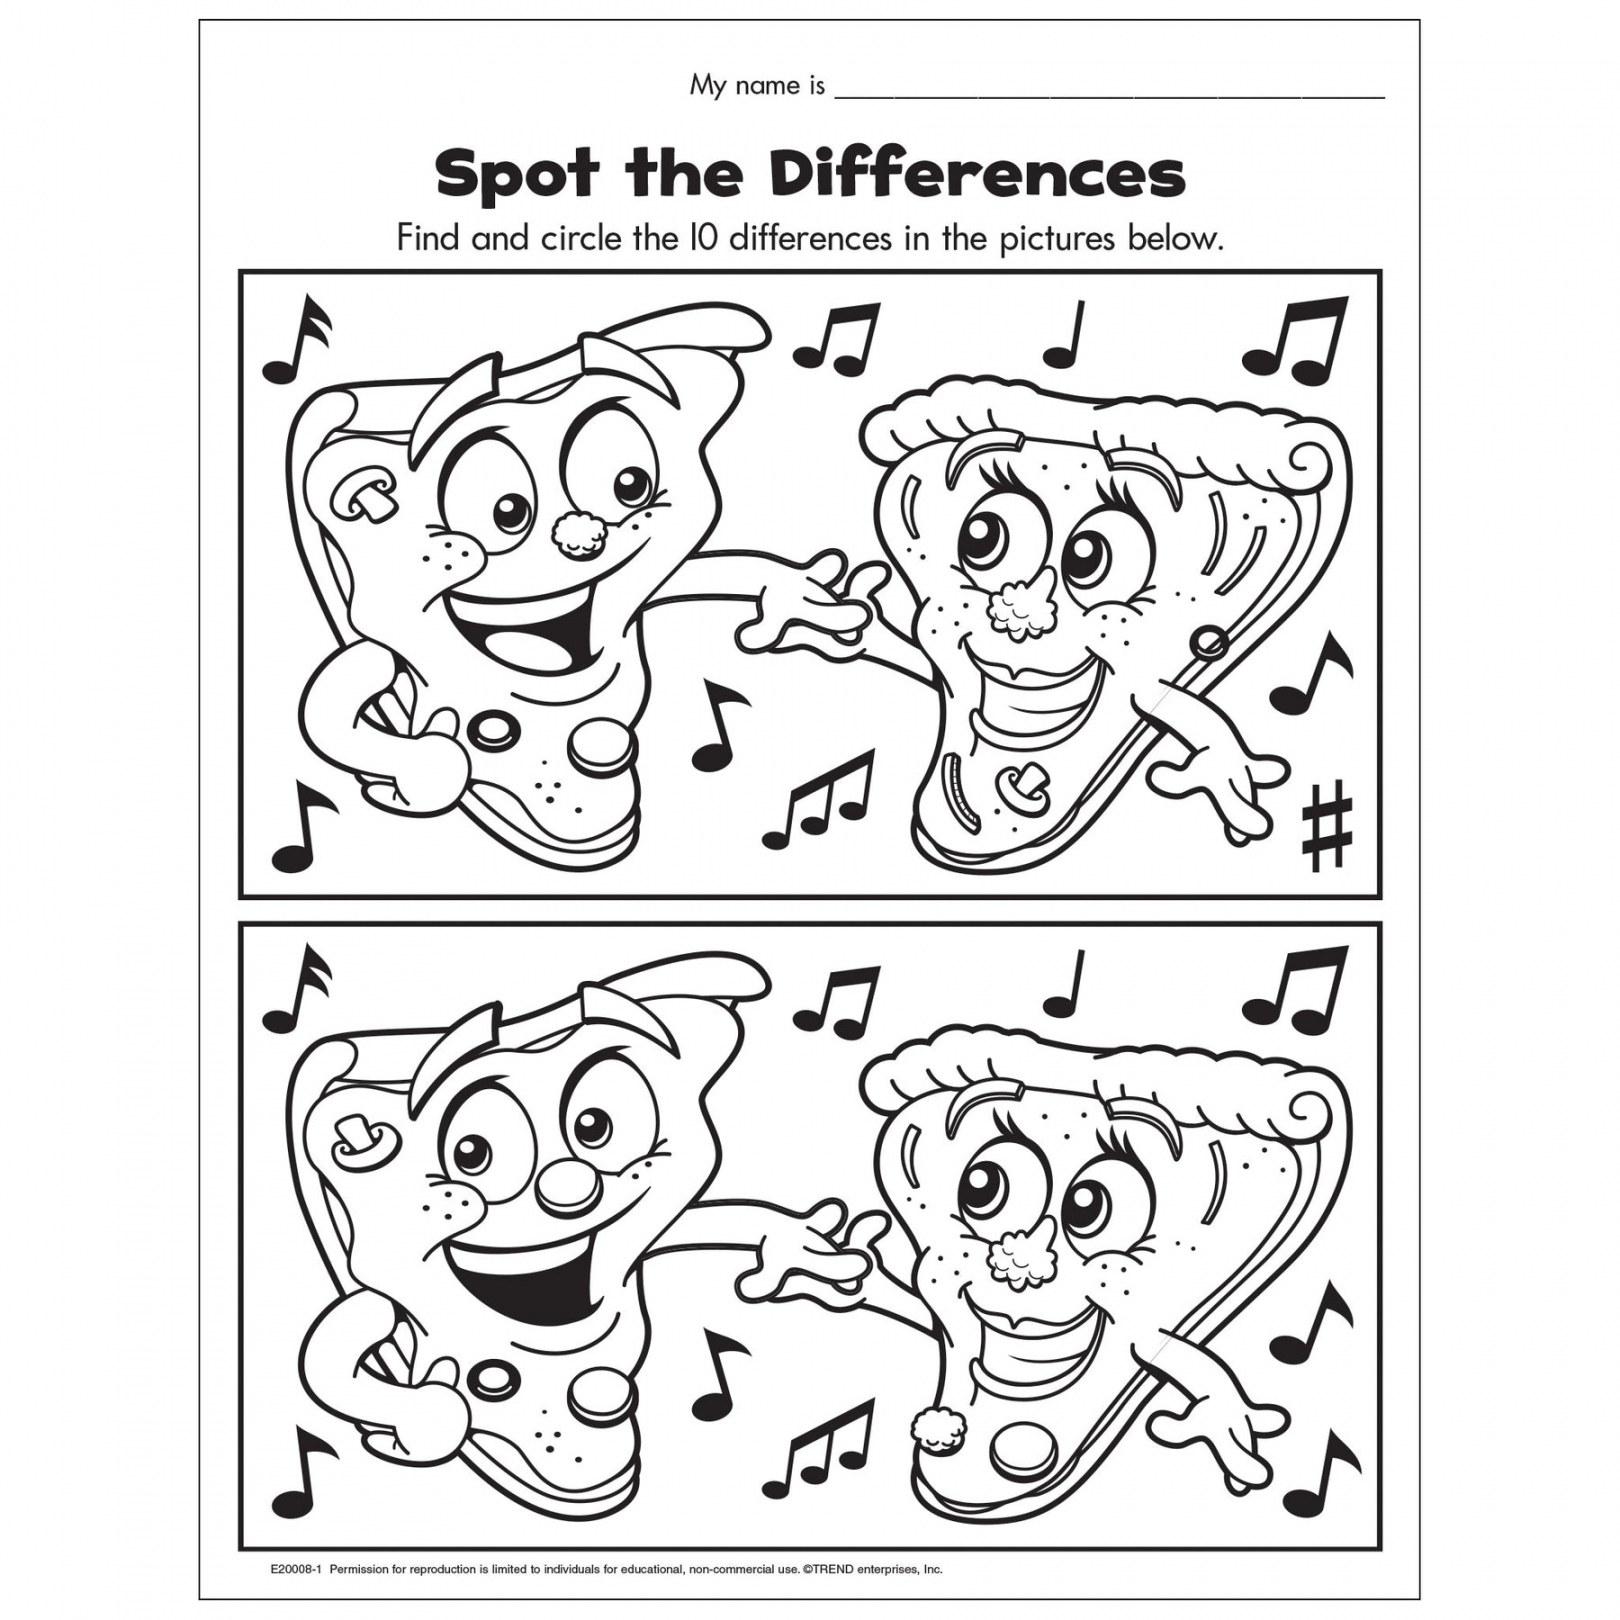 Free Printable Pizza Time Spot the Differences Activity Sheet